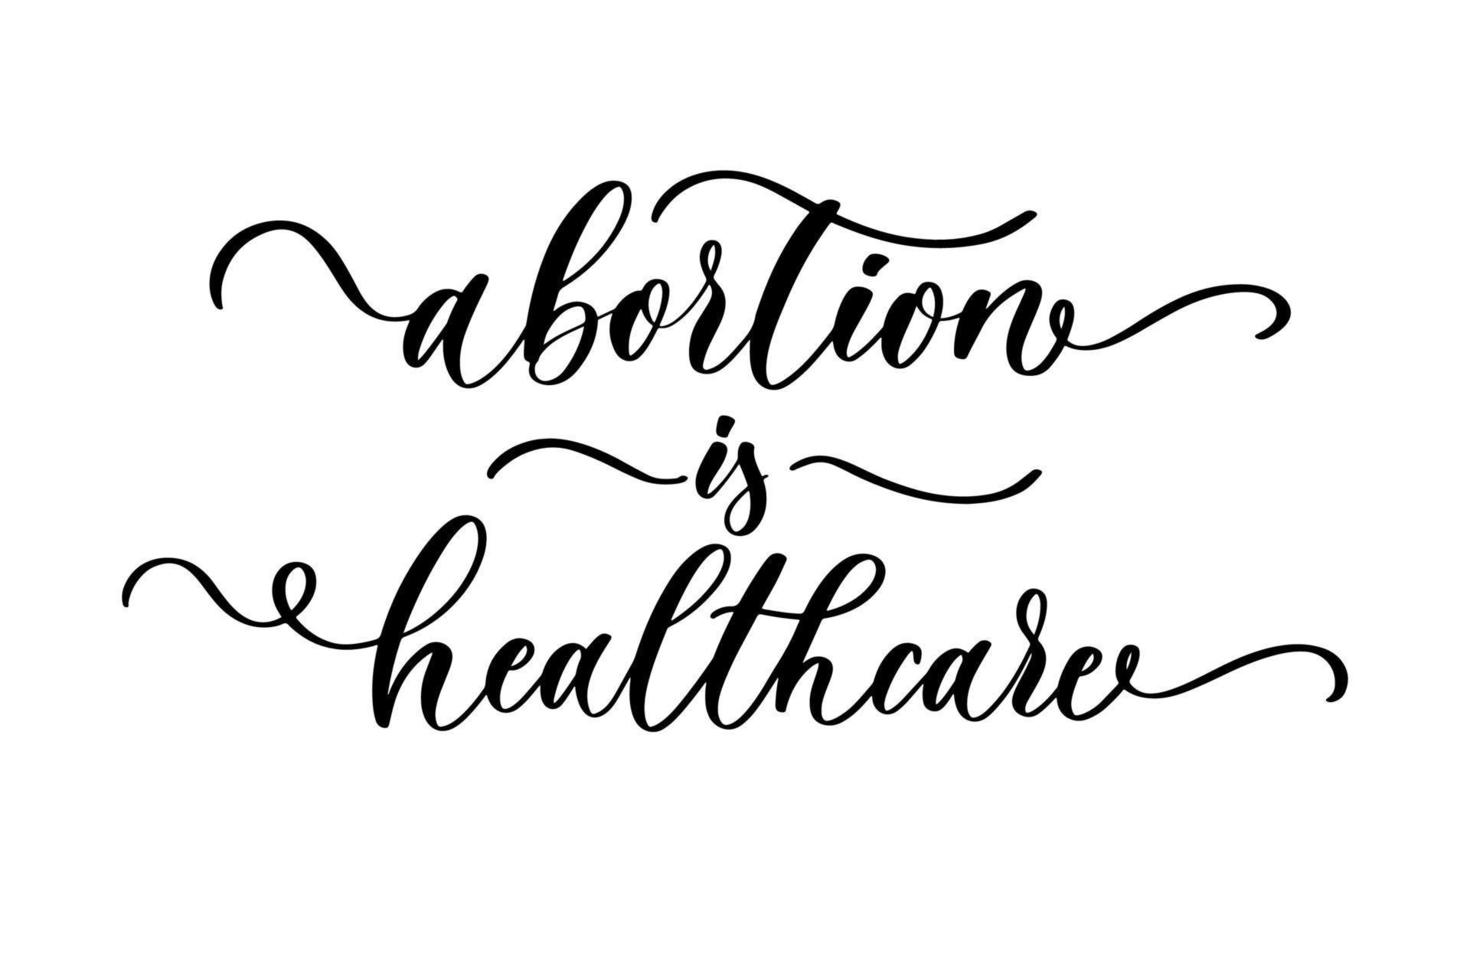 Abortion is healthcare. Sign. Keep abortion legal and safe banner. Woman rights. vector